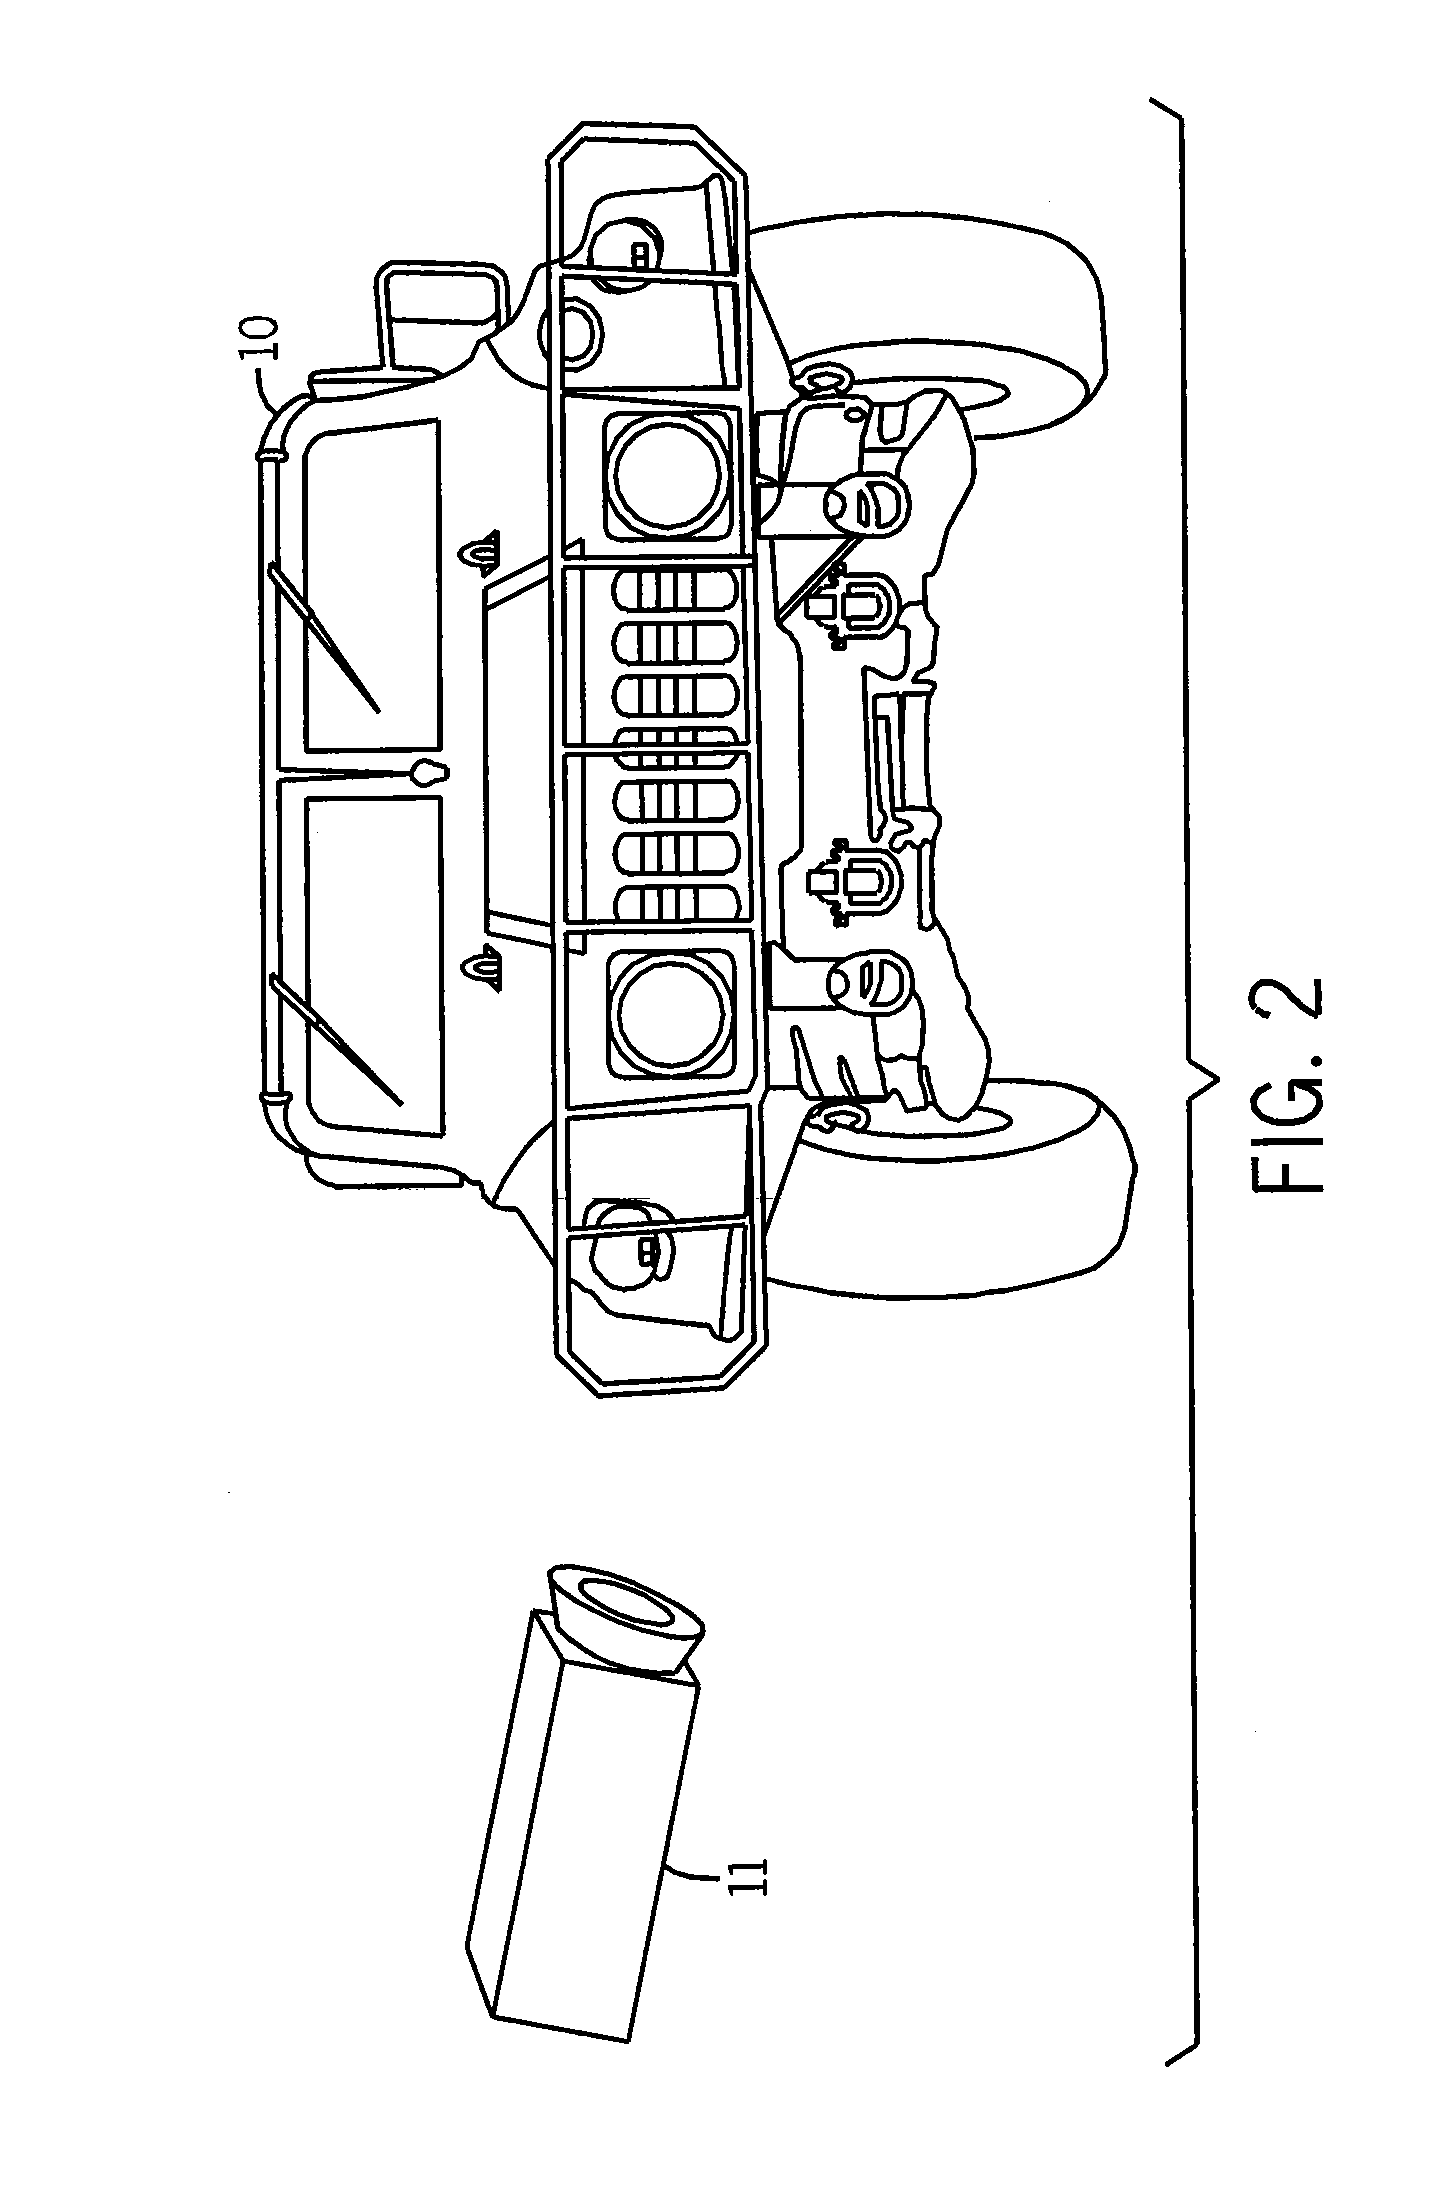 Method and system for determining a volume of an object from two-dimensional images